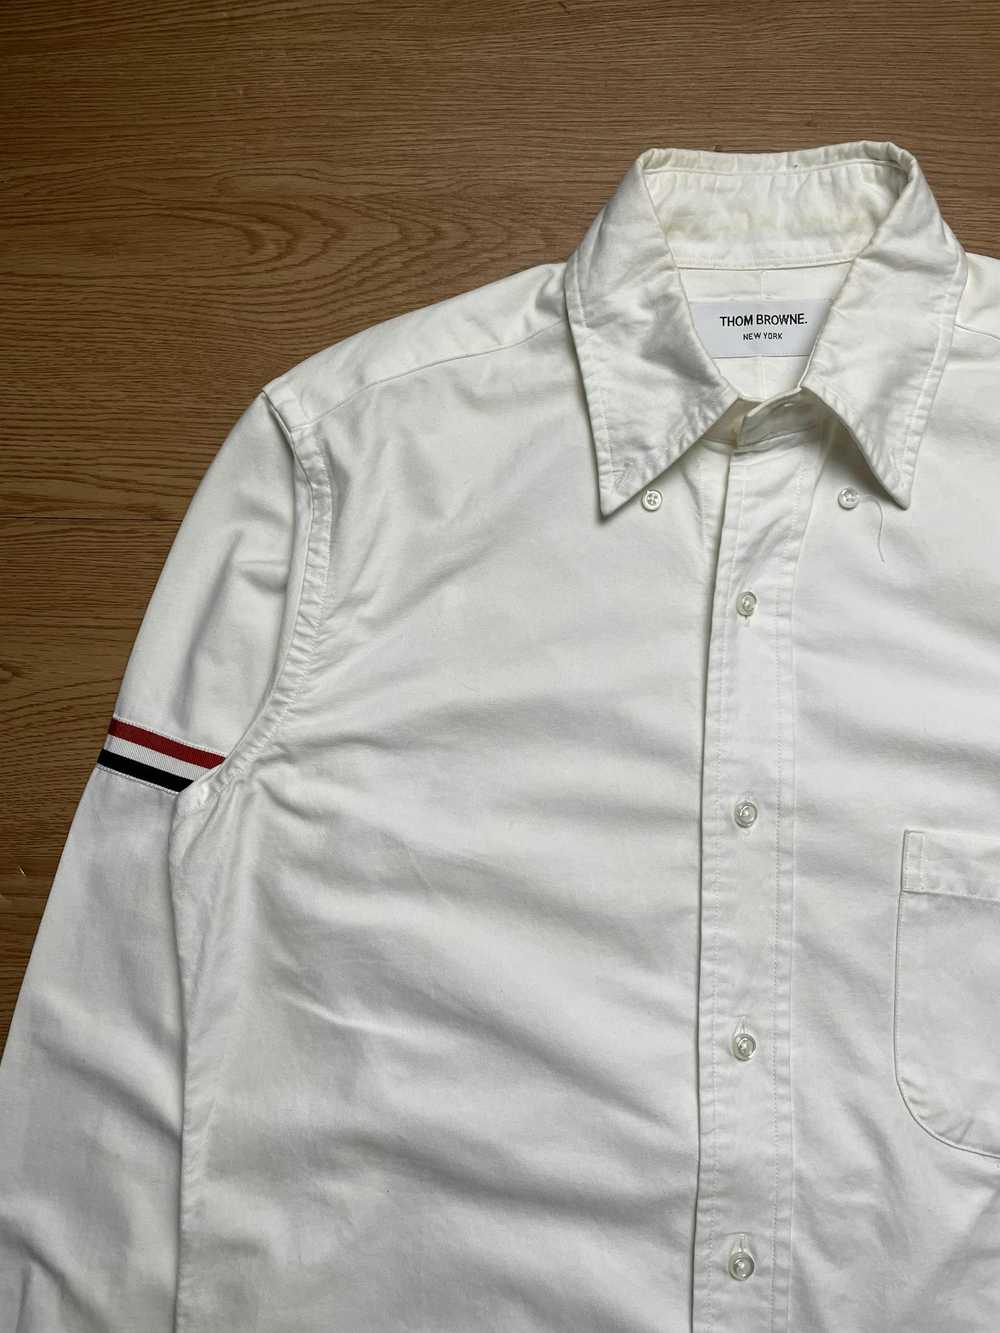 Thom Browne Thom Browne Button up Shirt - image 3